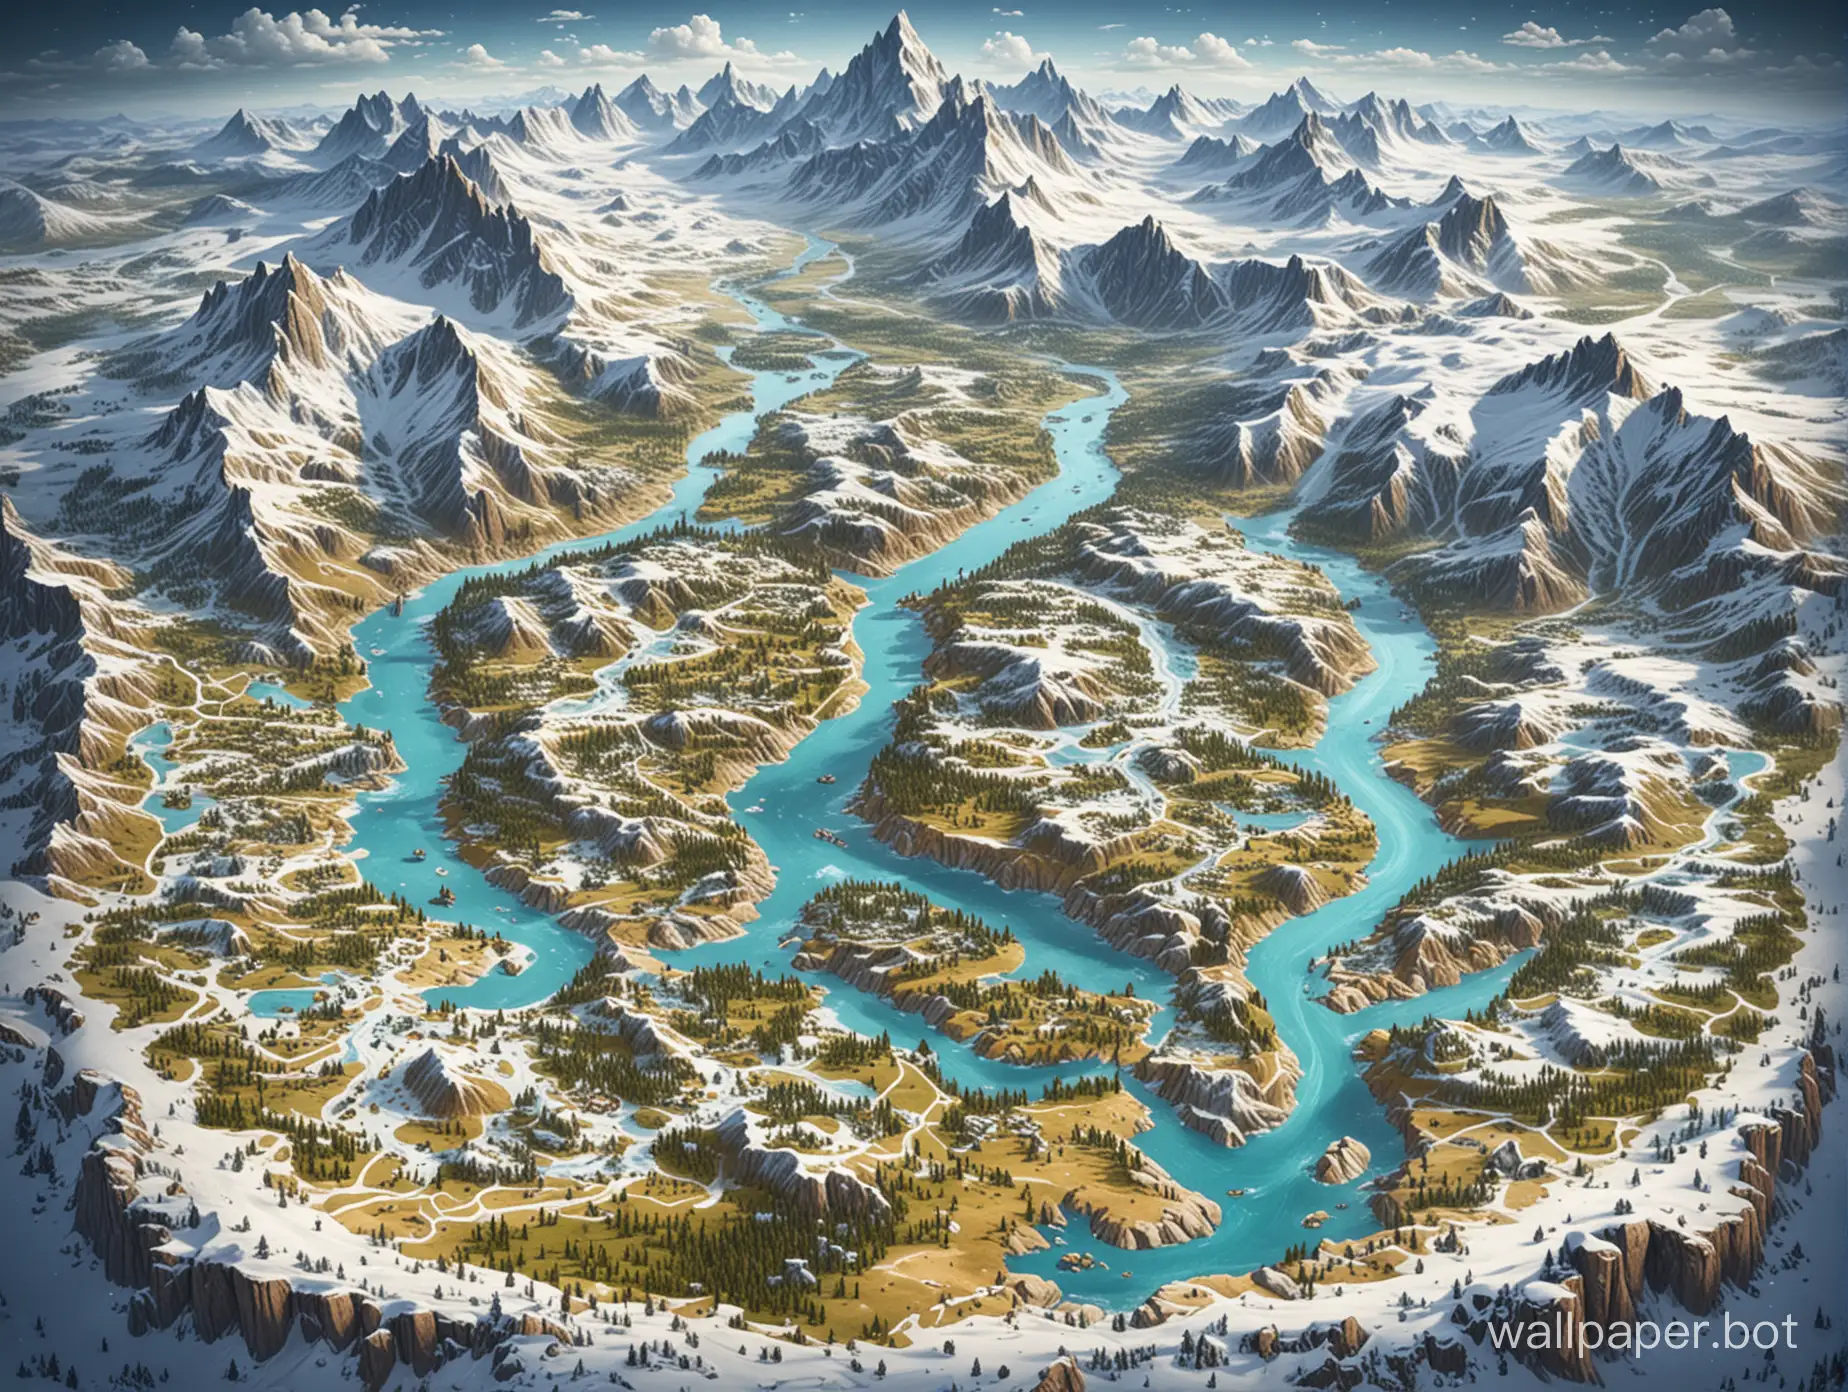 fantasy world map, top view, different landscape, top view, snow, forests, mountains, rivers, plains, cities